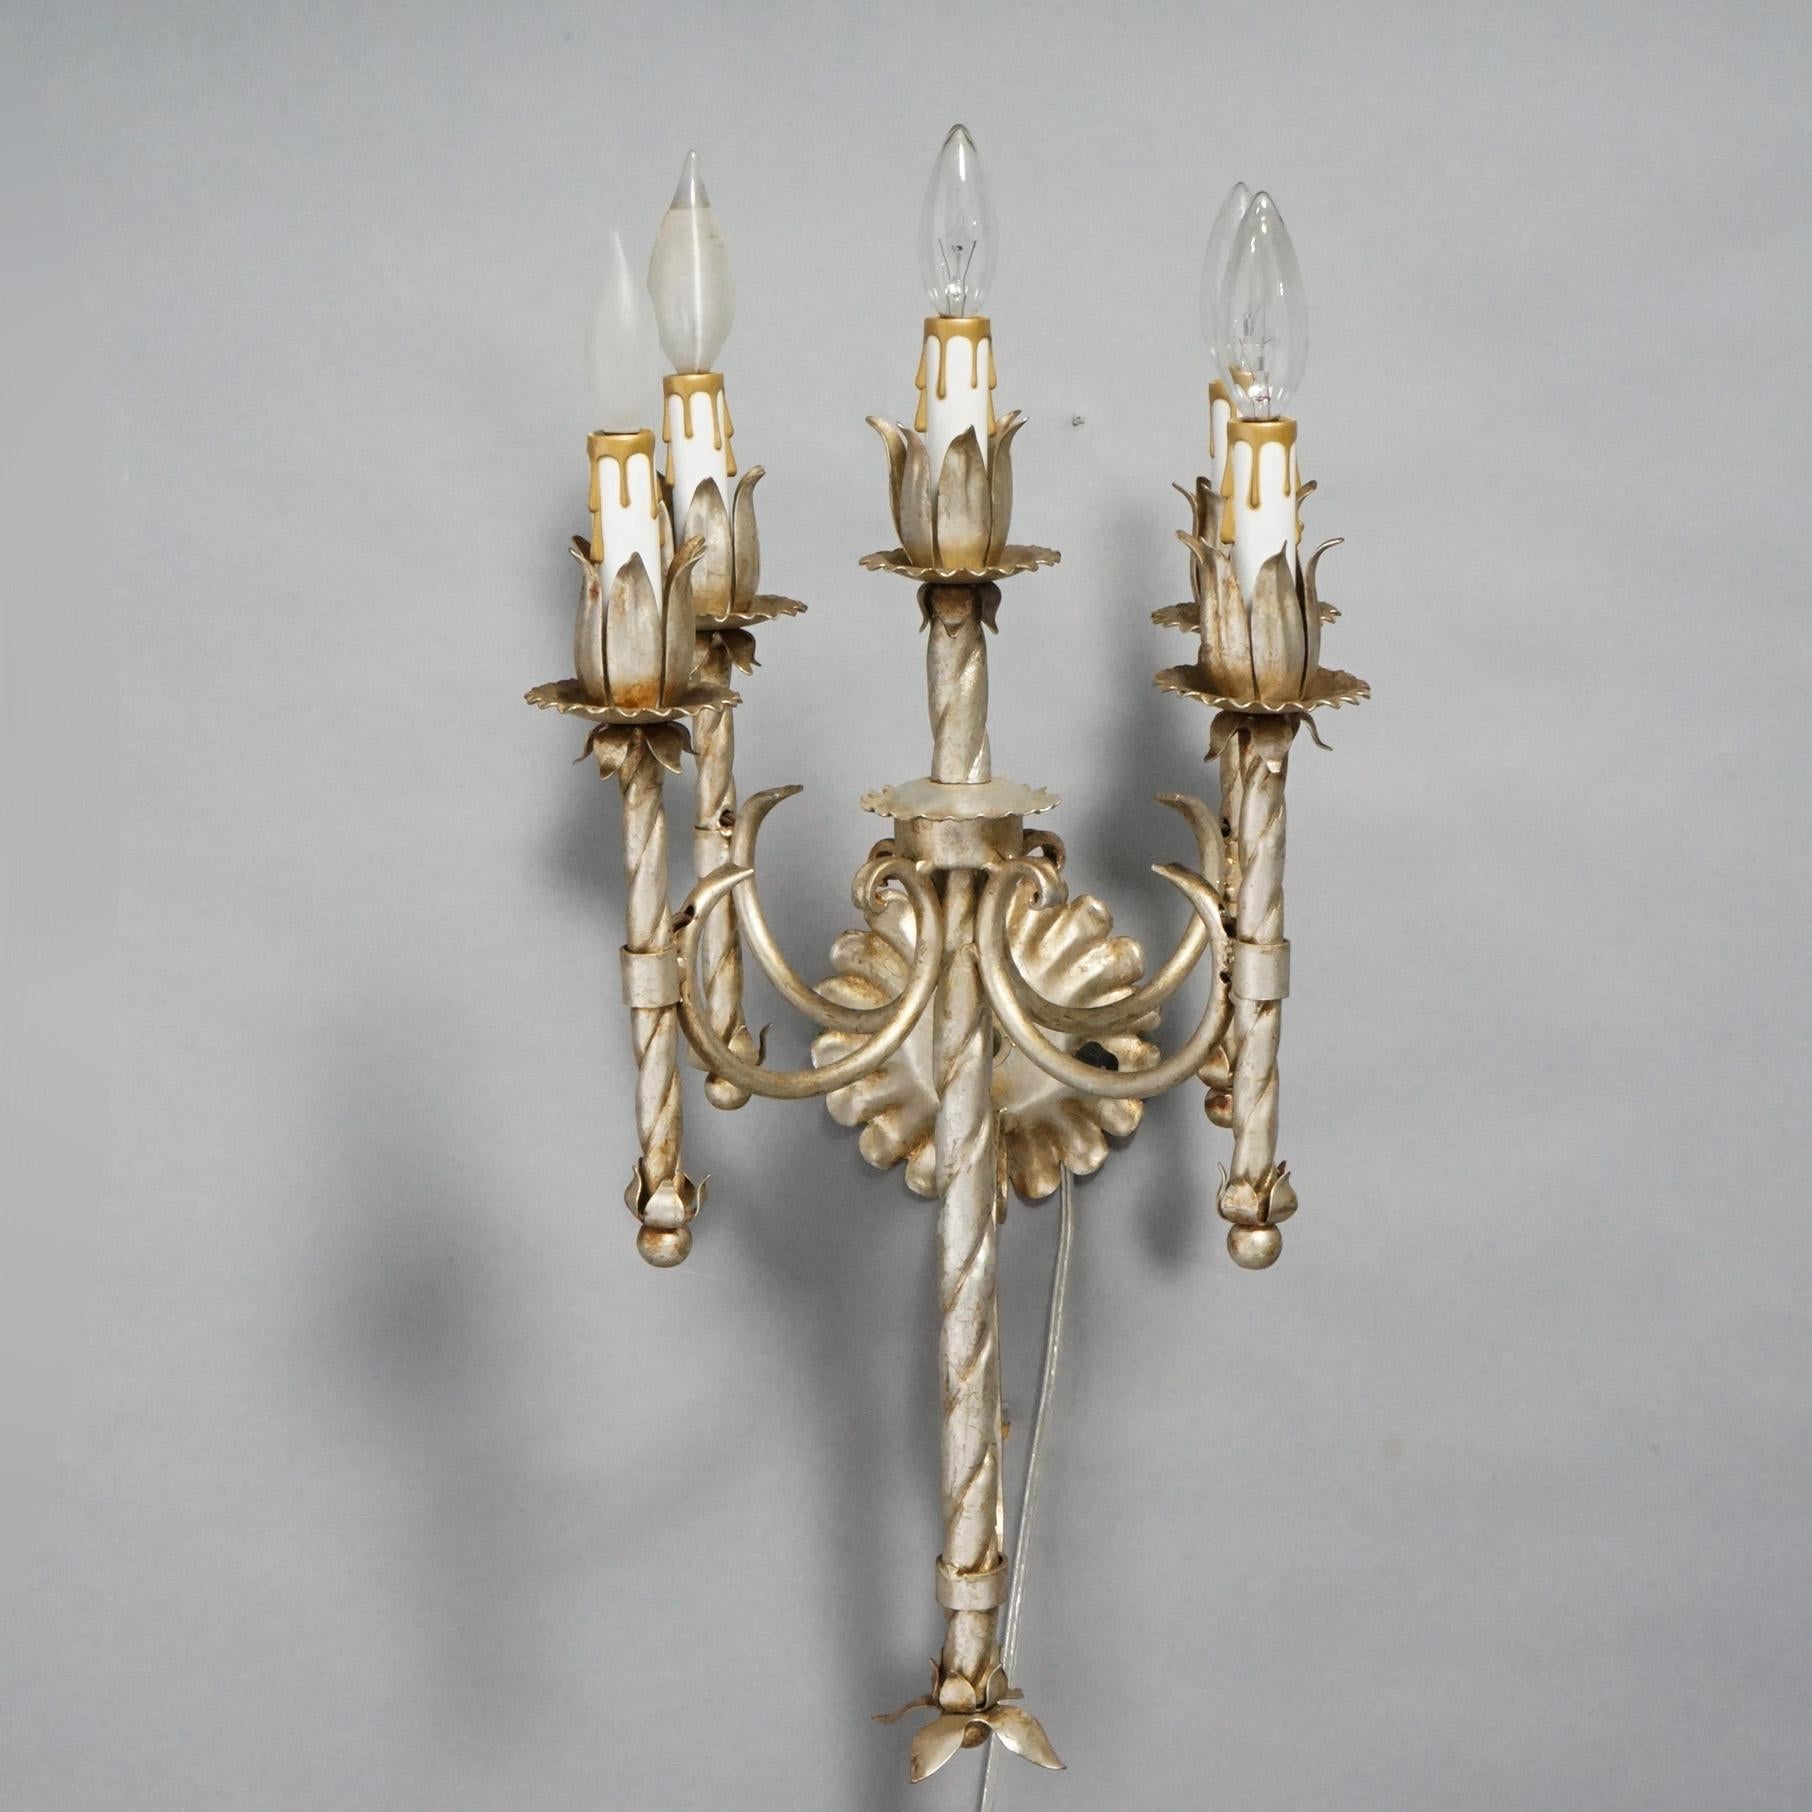 Antique Arts & Crafts Gothic Silvered Finish Candelabra Wall Sconces 20th C. For Sale 1